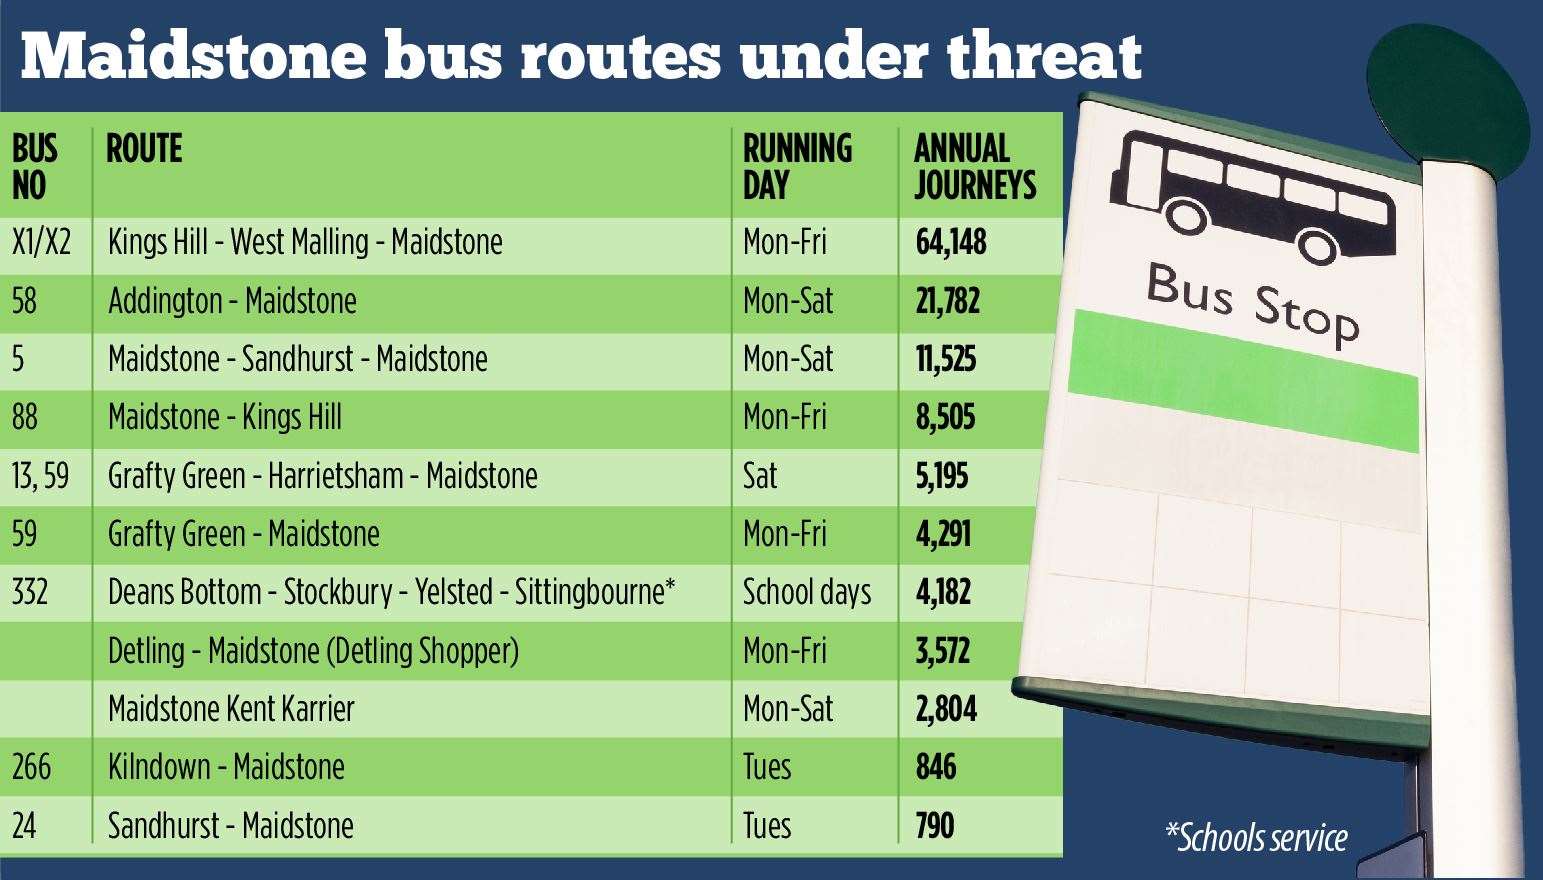 The Maidstone routes under threat